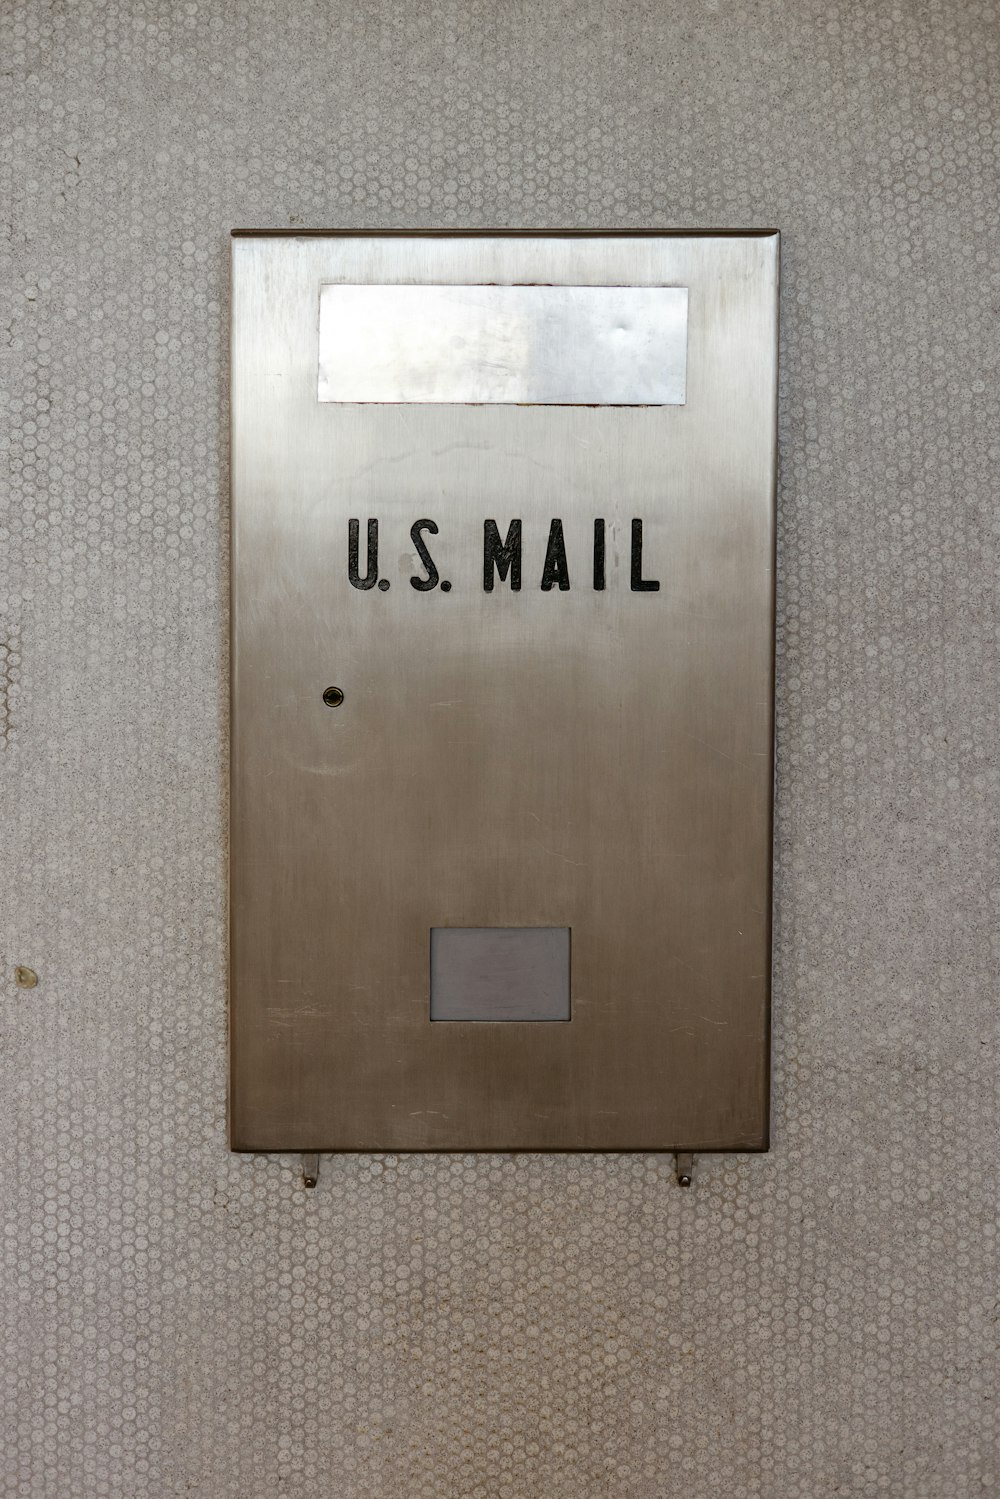 a metal mailbox with a us mail on it